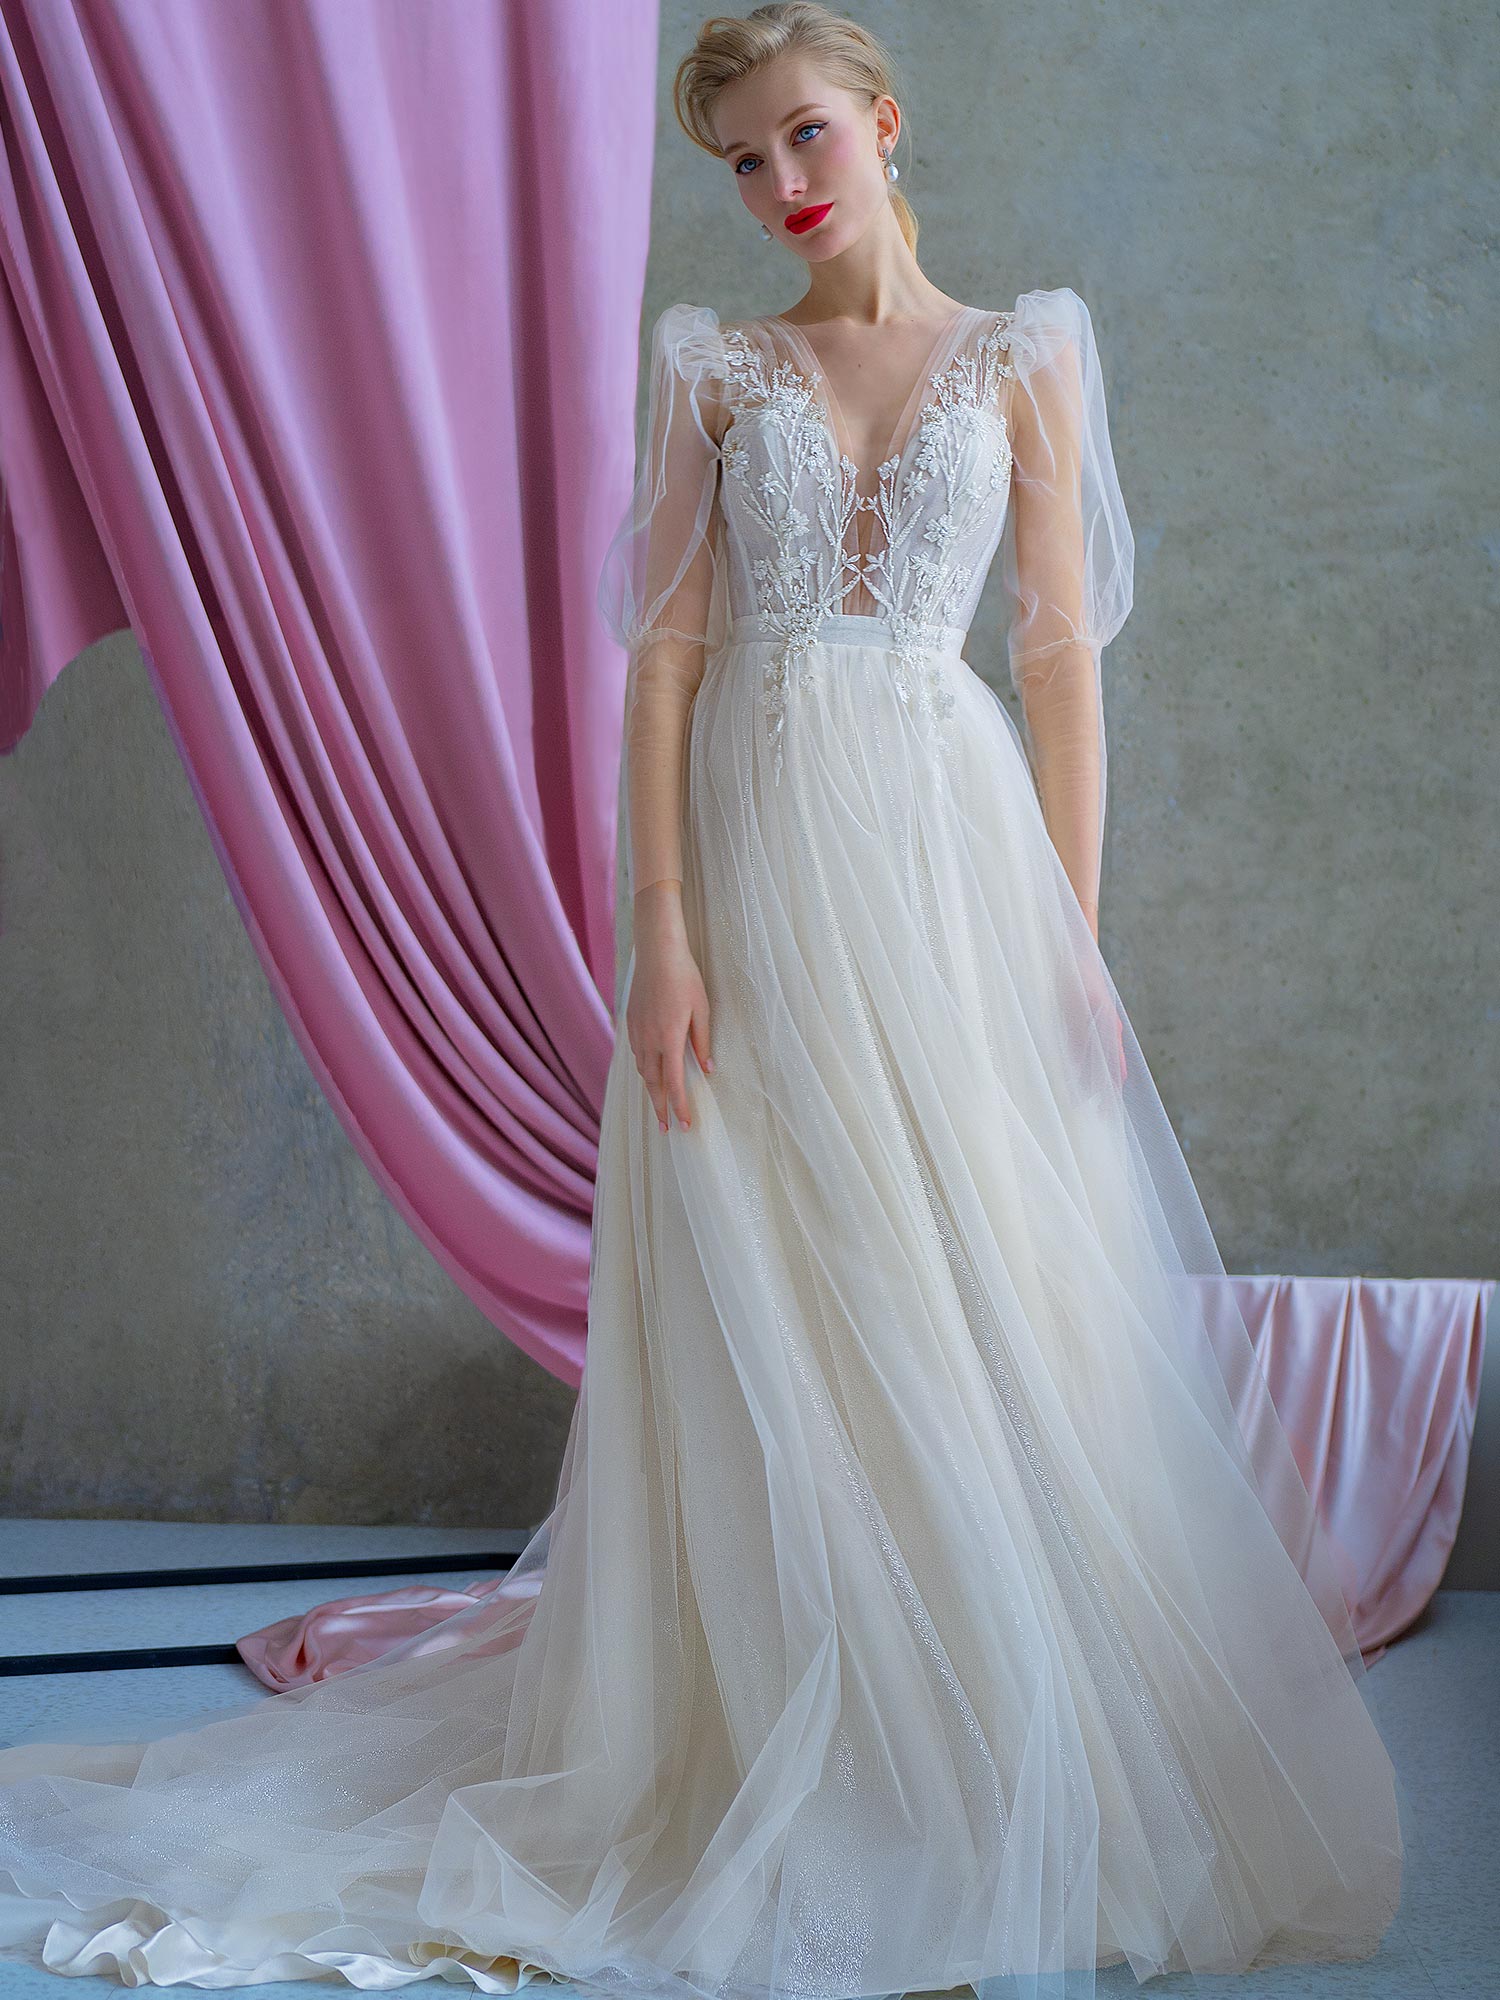 Latest Wedding Dresses Top 10 latest wedding dresses - Find the Perfect ...